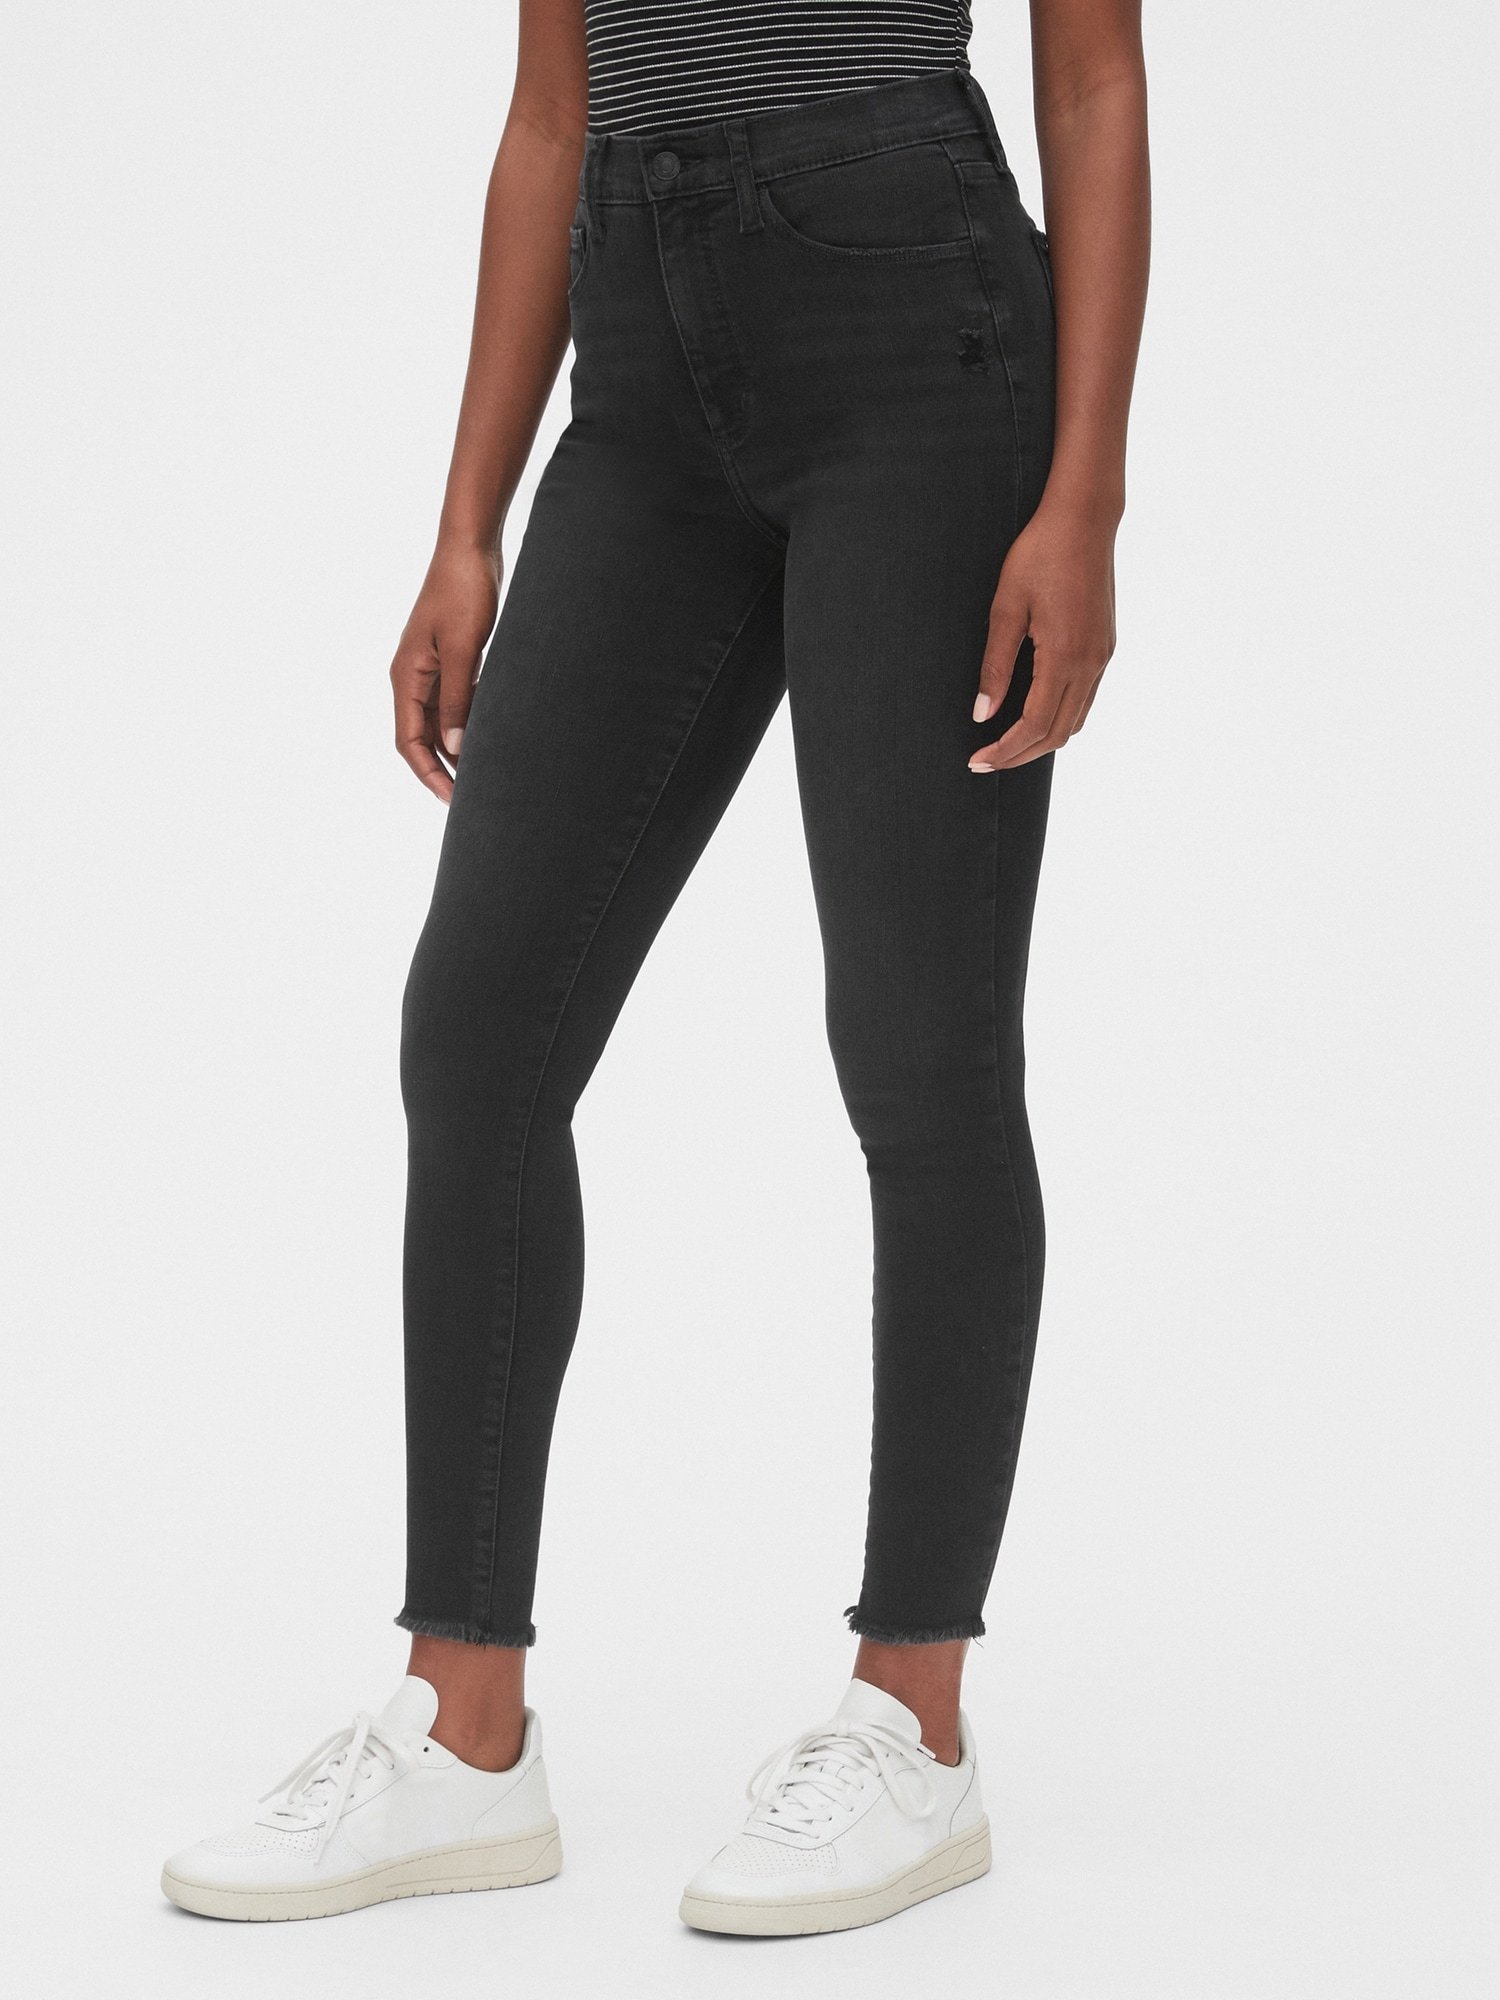 High Rise Jegging Jean product image